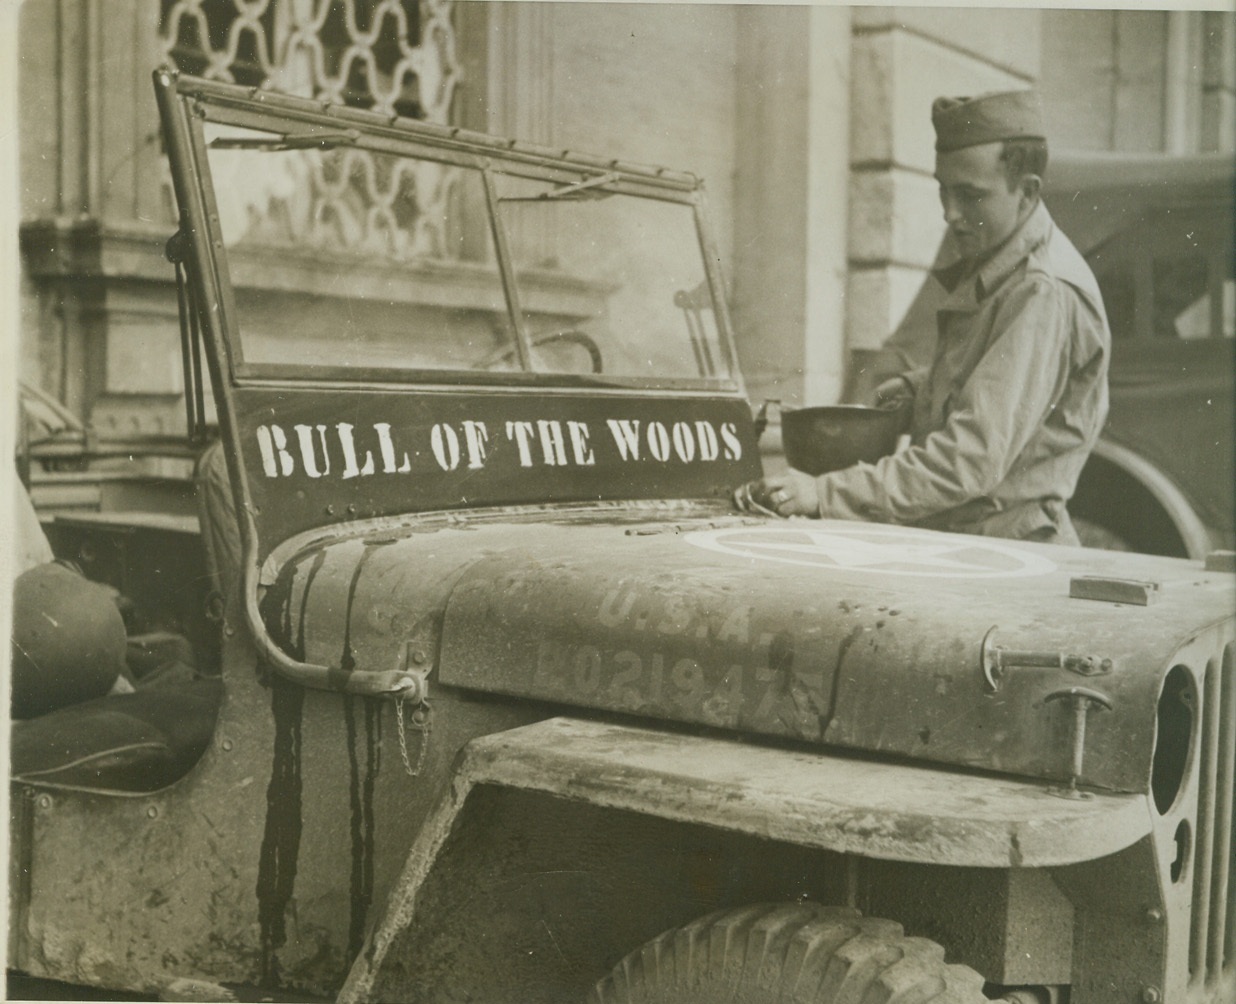 Named for His Favorite, 11/28/1943. Somewhere in Italy – “Bull of the Woods” is the favorite comic strip character of Private Robert Coba of Pittsburg, Kansas, so he gave that name to the Jeep he drives around the Italian front. Here, the soldier wipes mud from the little car that has seen service in Africa as well as Italy. Credit: (Photo by Bert Brandt, AMCE, photographer for War Picture Pool);